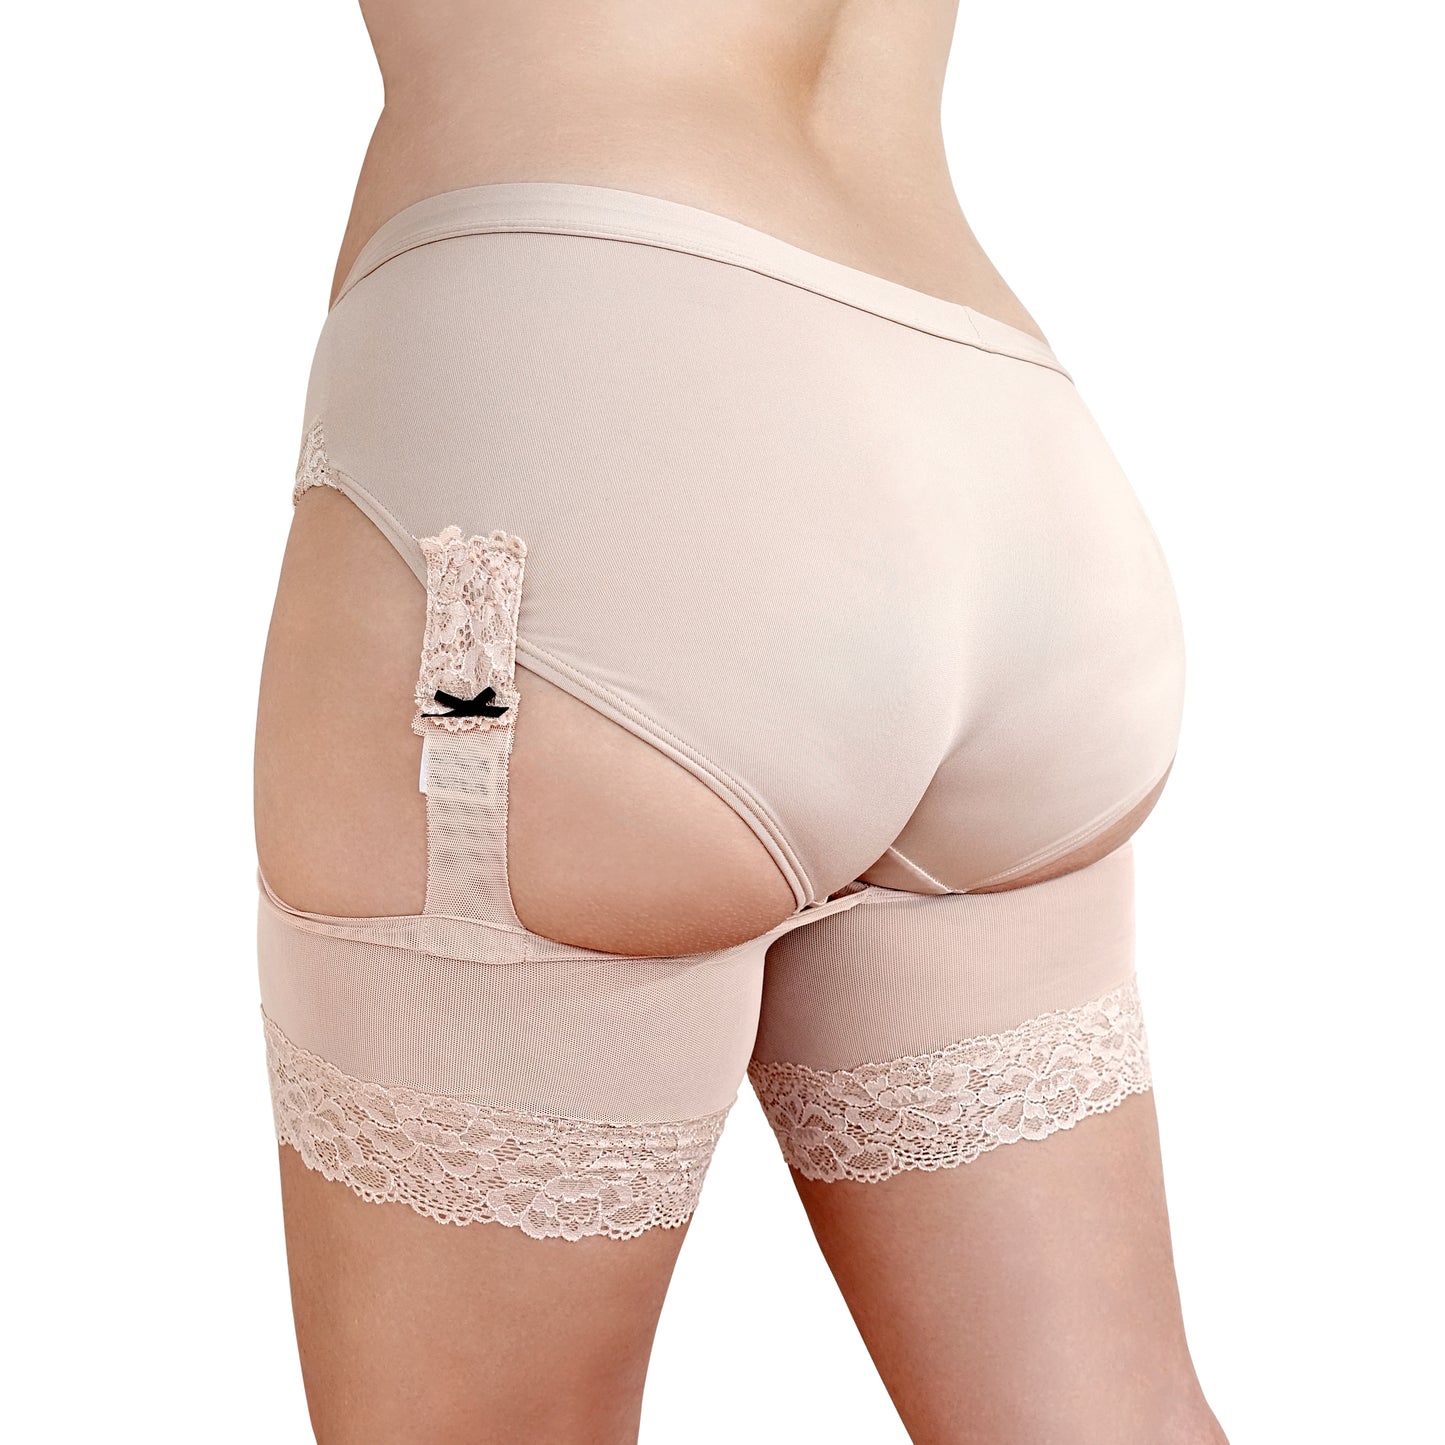 ANTI CHAFE Clip-On Thigh Bands - NUDE BEIGE